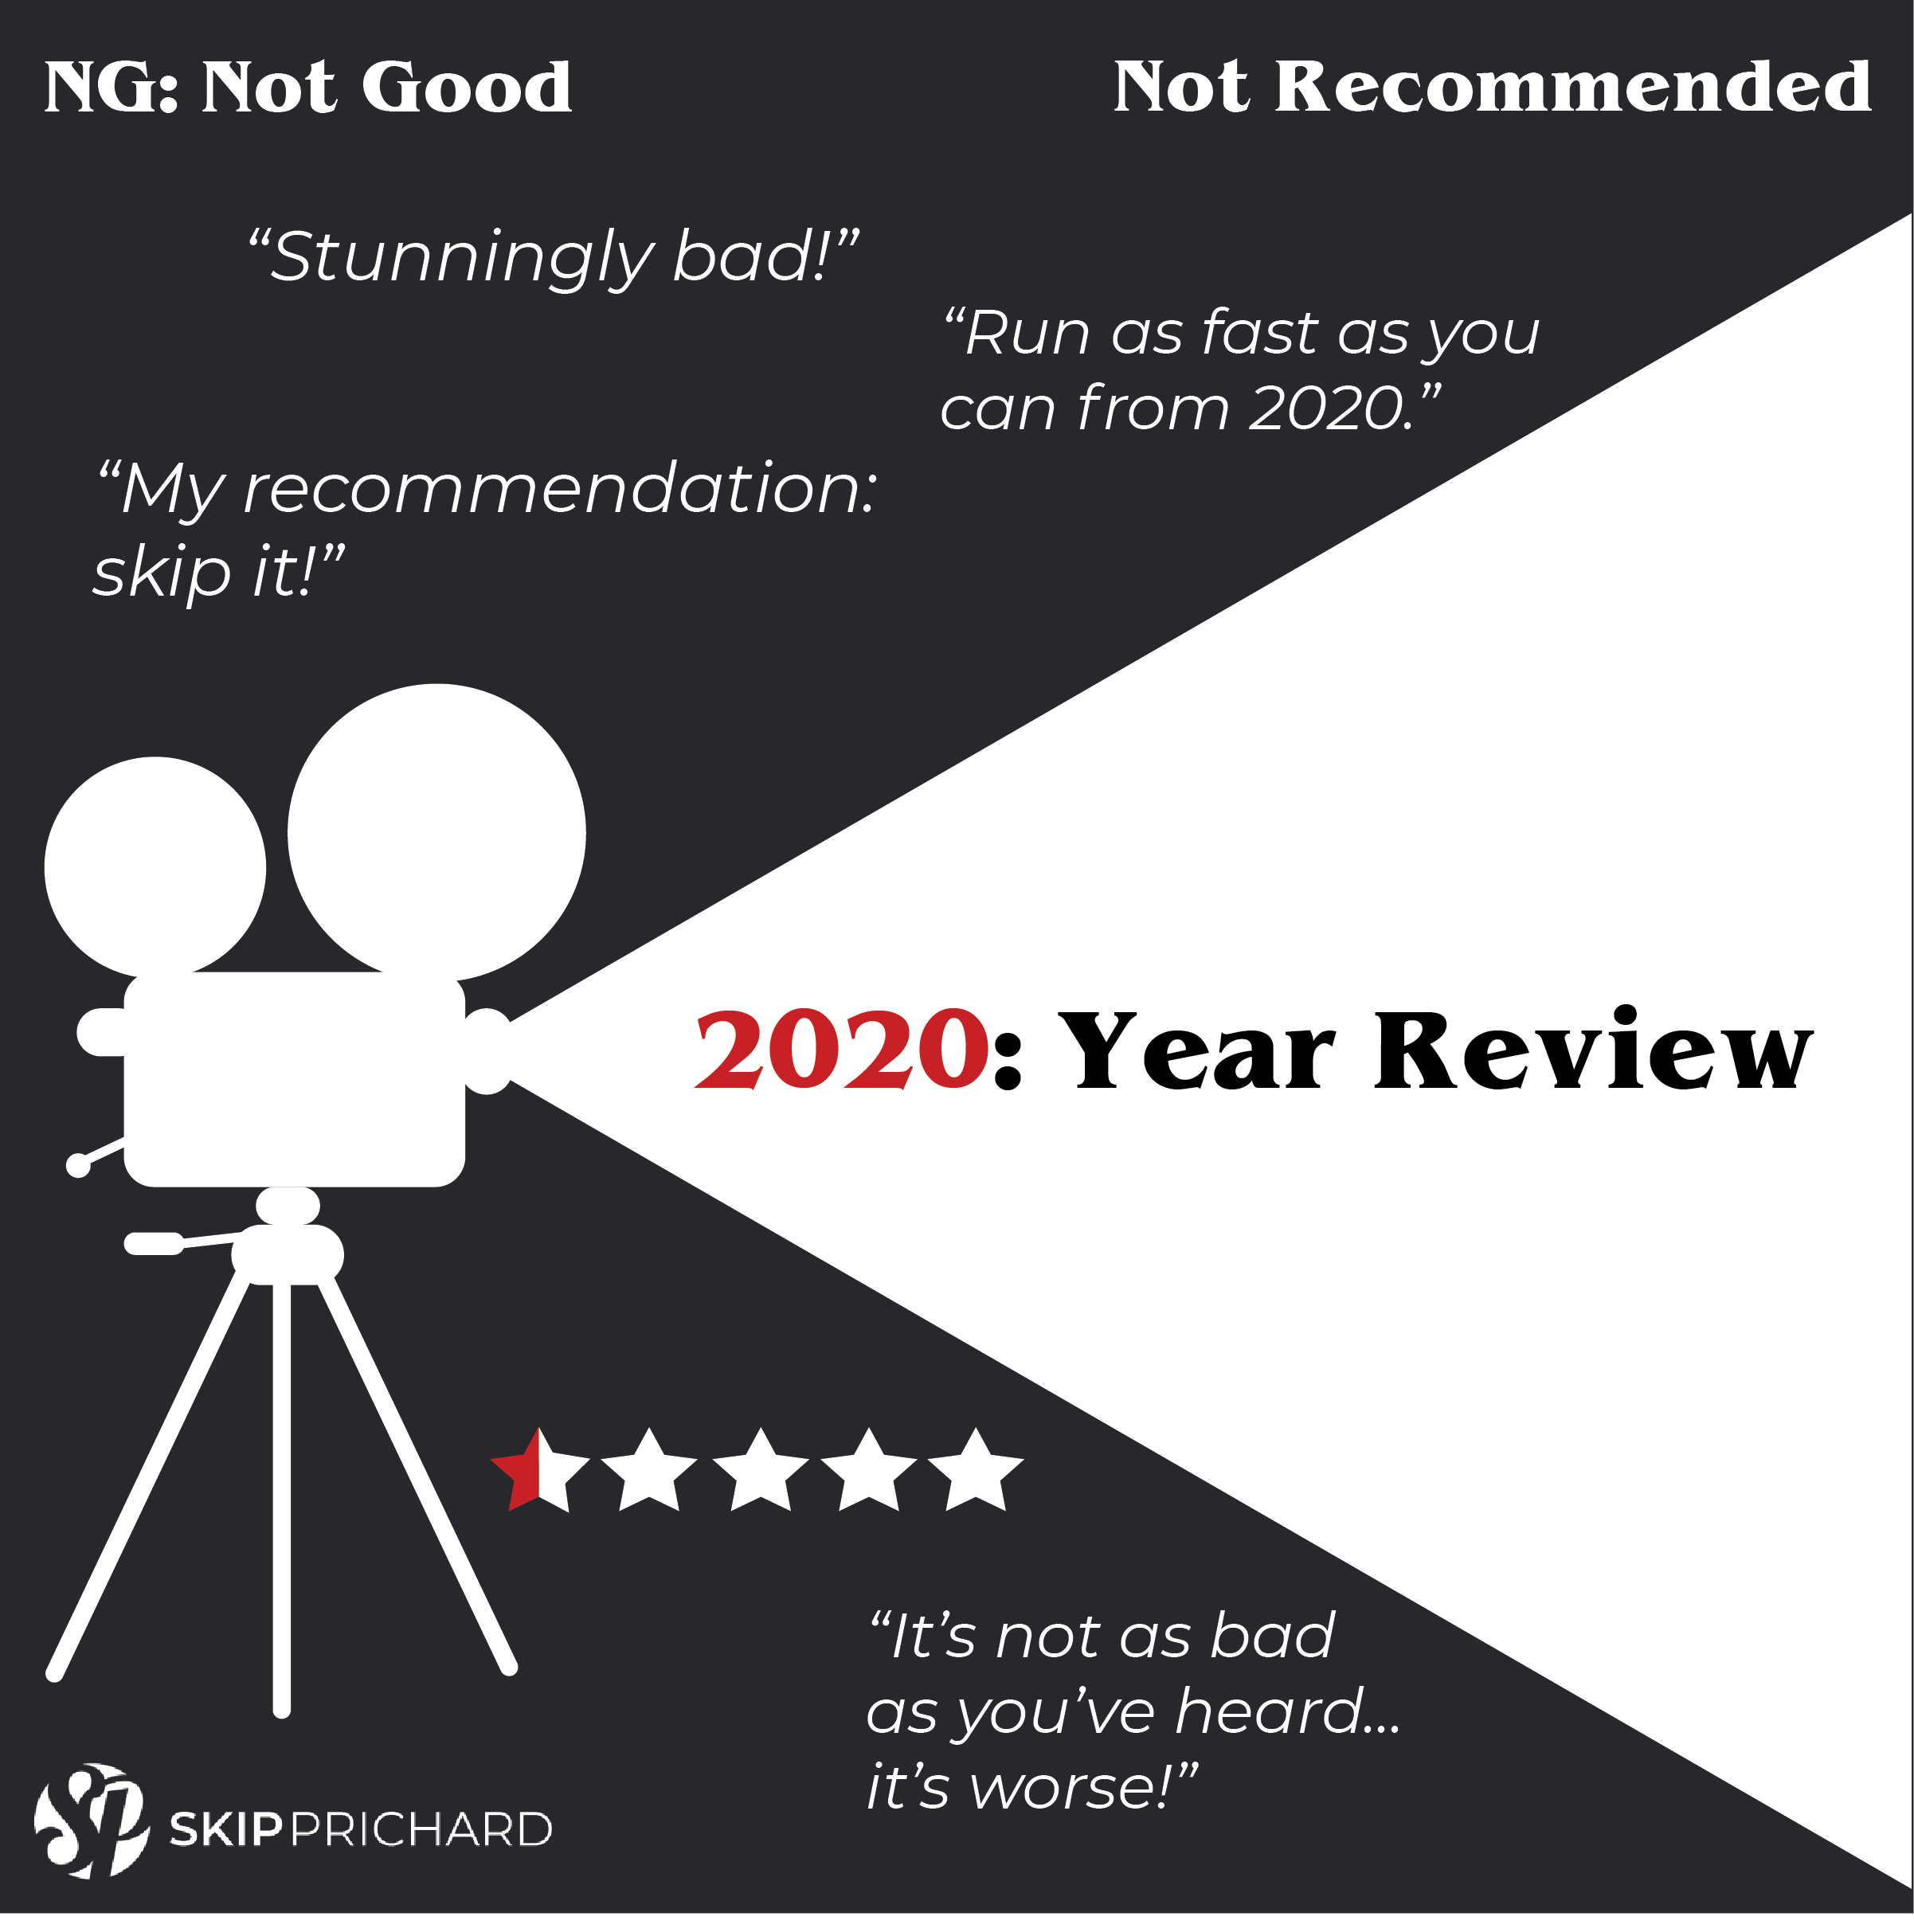 2020 review